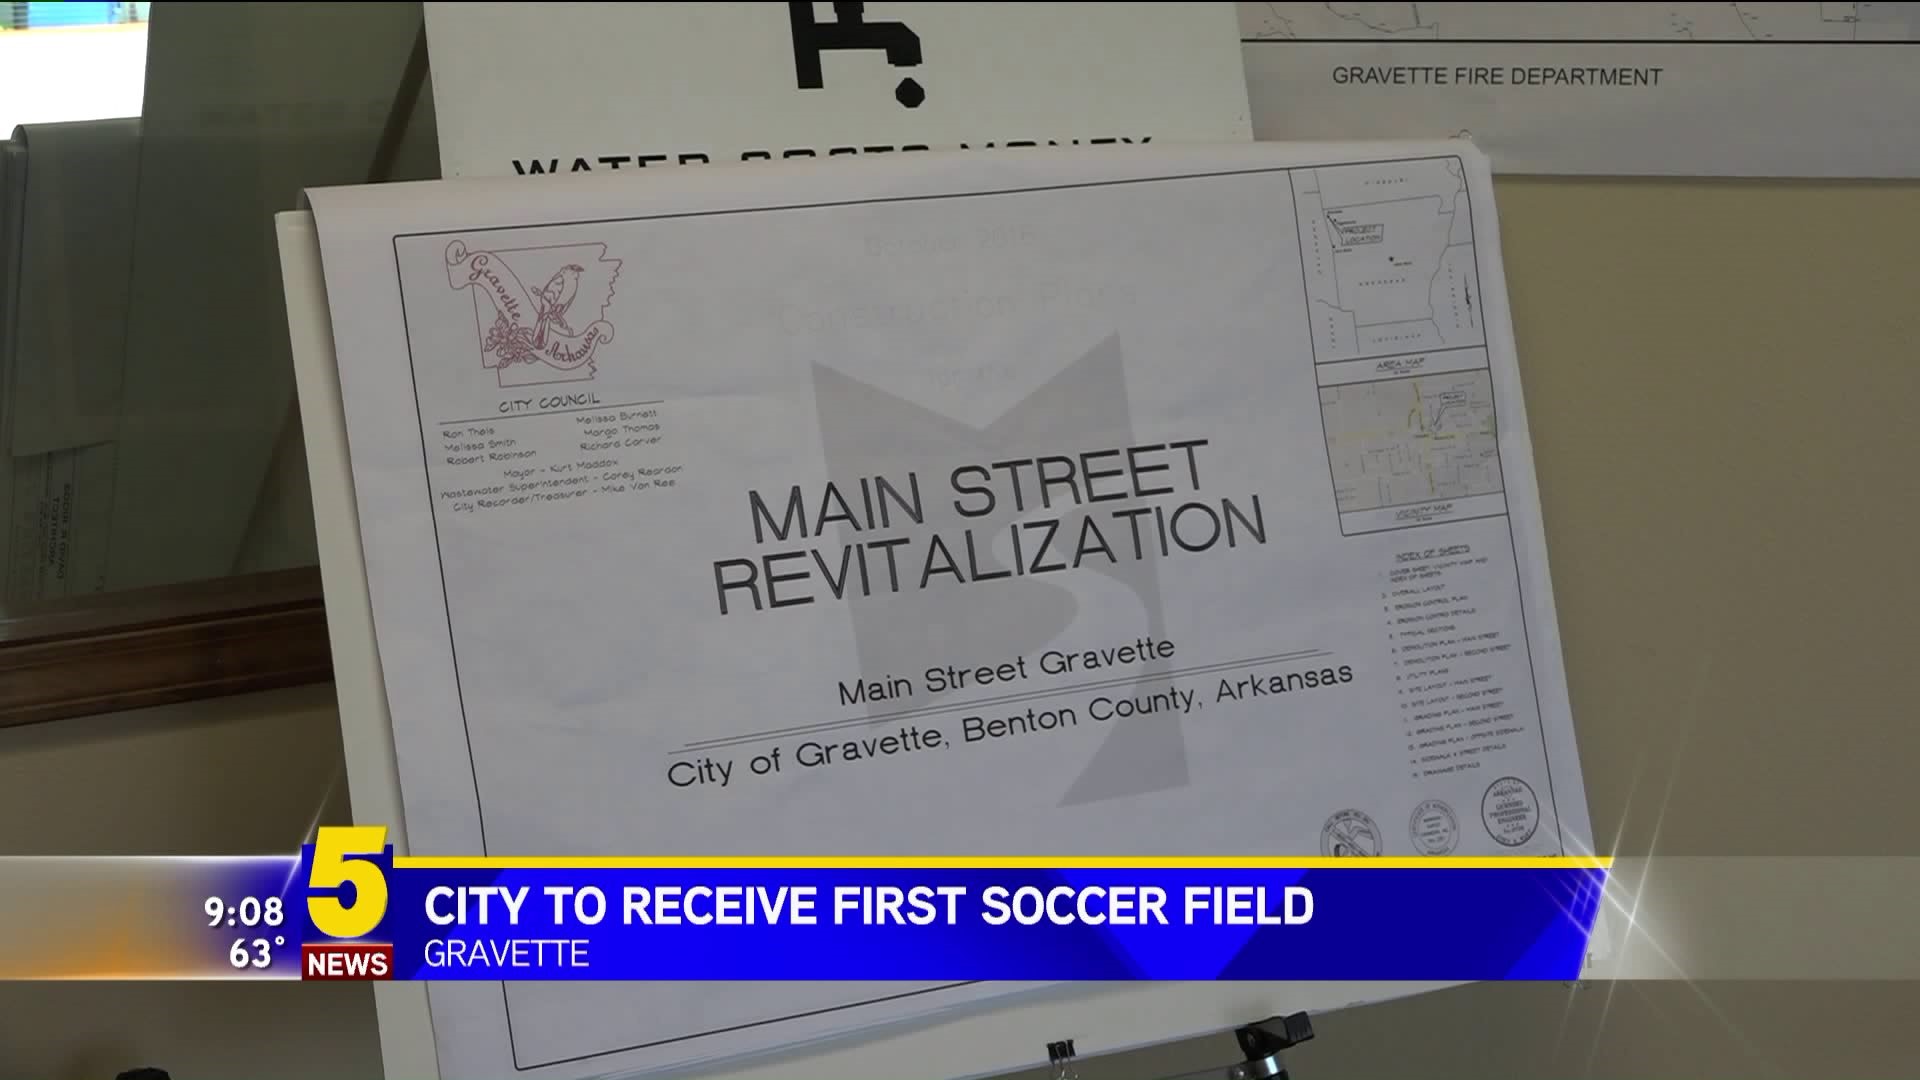 City To Receive First Soccer Field